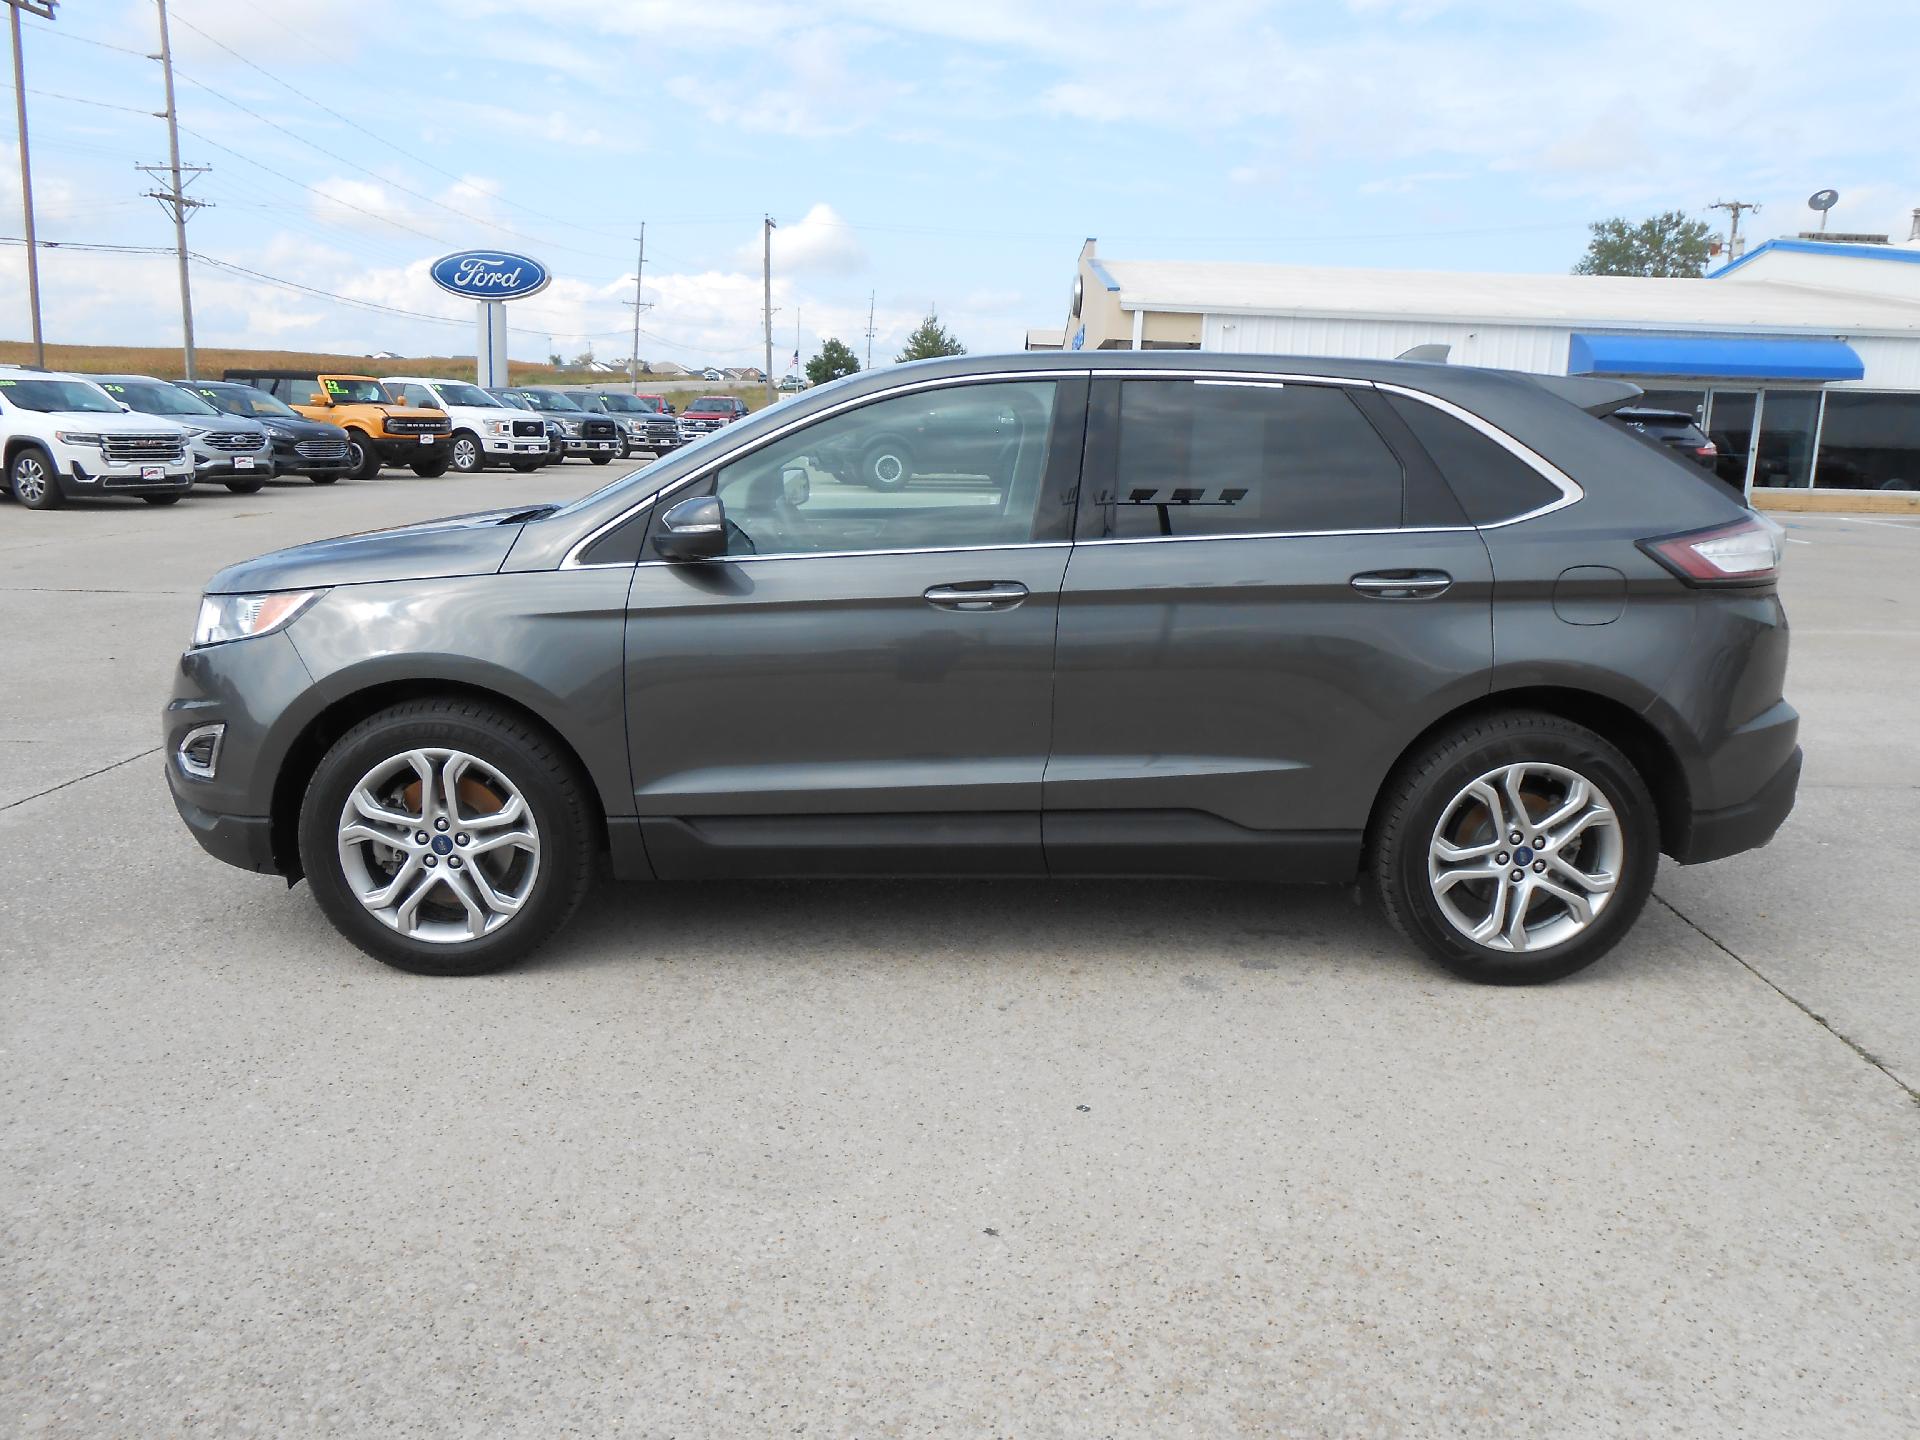 Used 2016 Ford Edge Titanium with VIN 2FMPK4K9XGBB66932 for sale in Williamsburg, IA